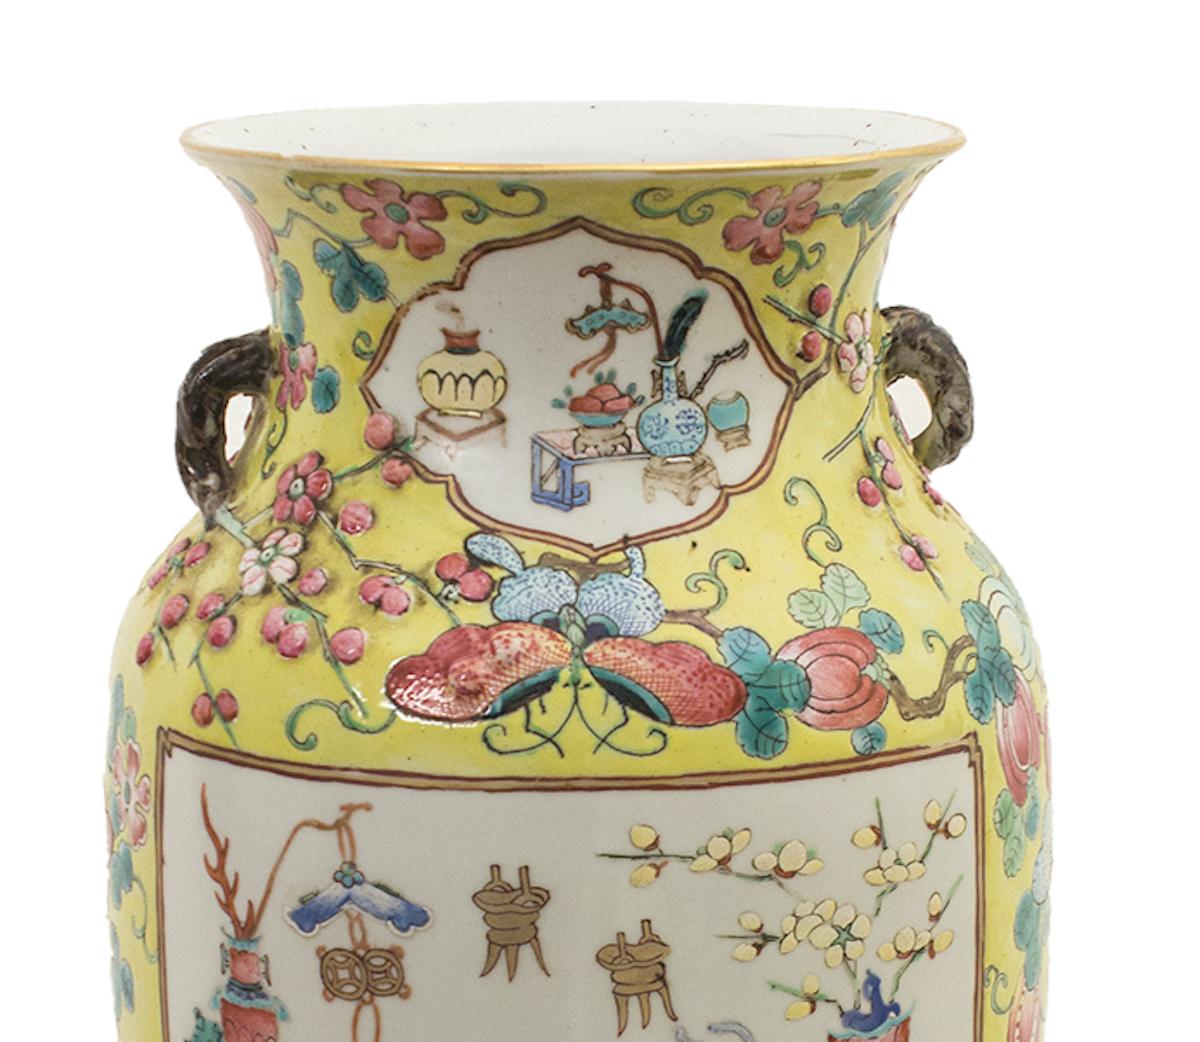 The Chinese polychrome vase is a superb ceramic vase, realized in the early 20th century. 

Yellow ground with polychrome fruits, butterflies and flowers, two large reserves with good omen objects.

In very good condition. 

Provenance: